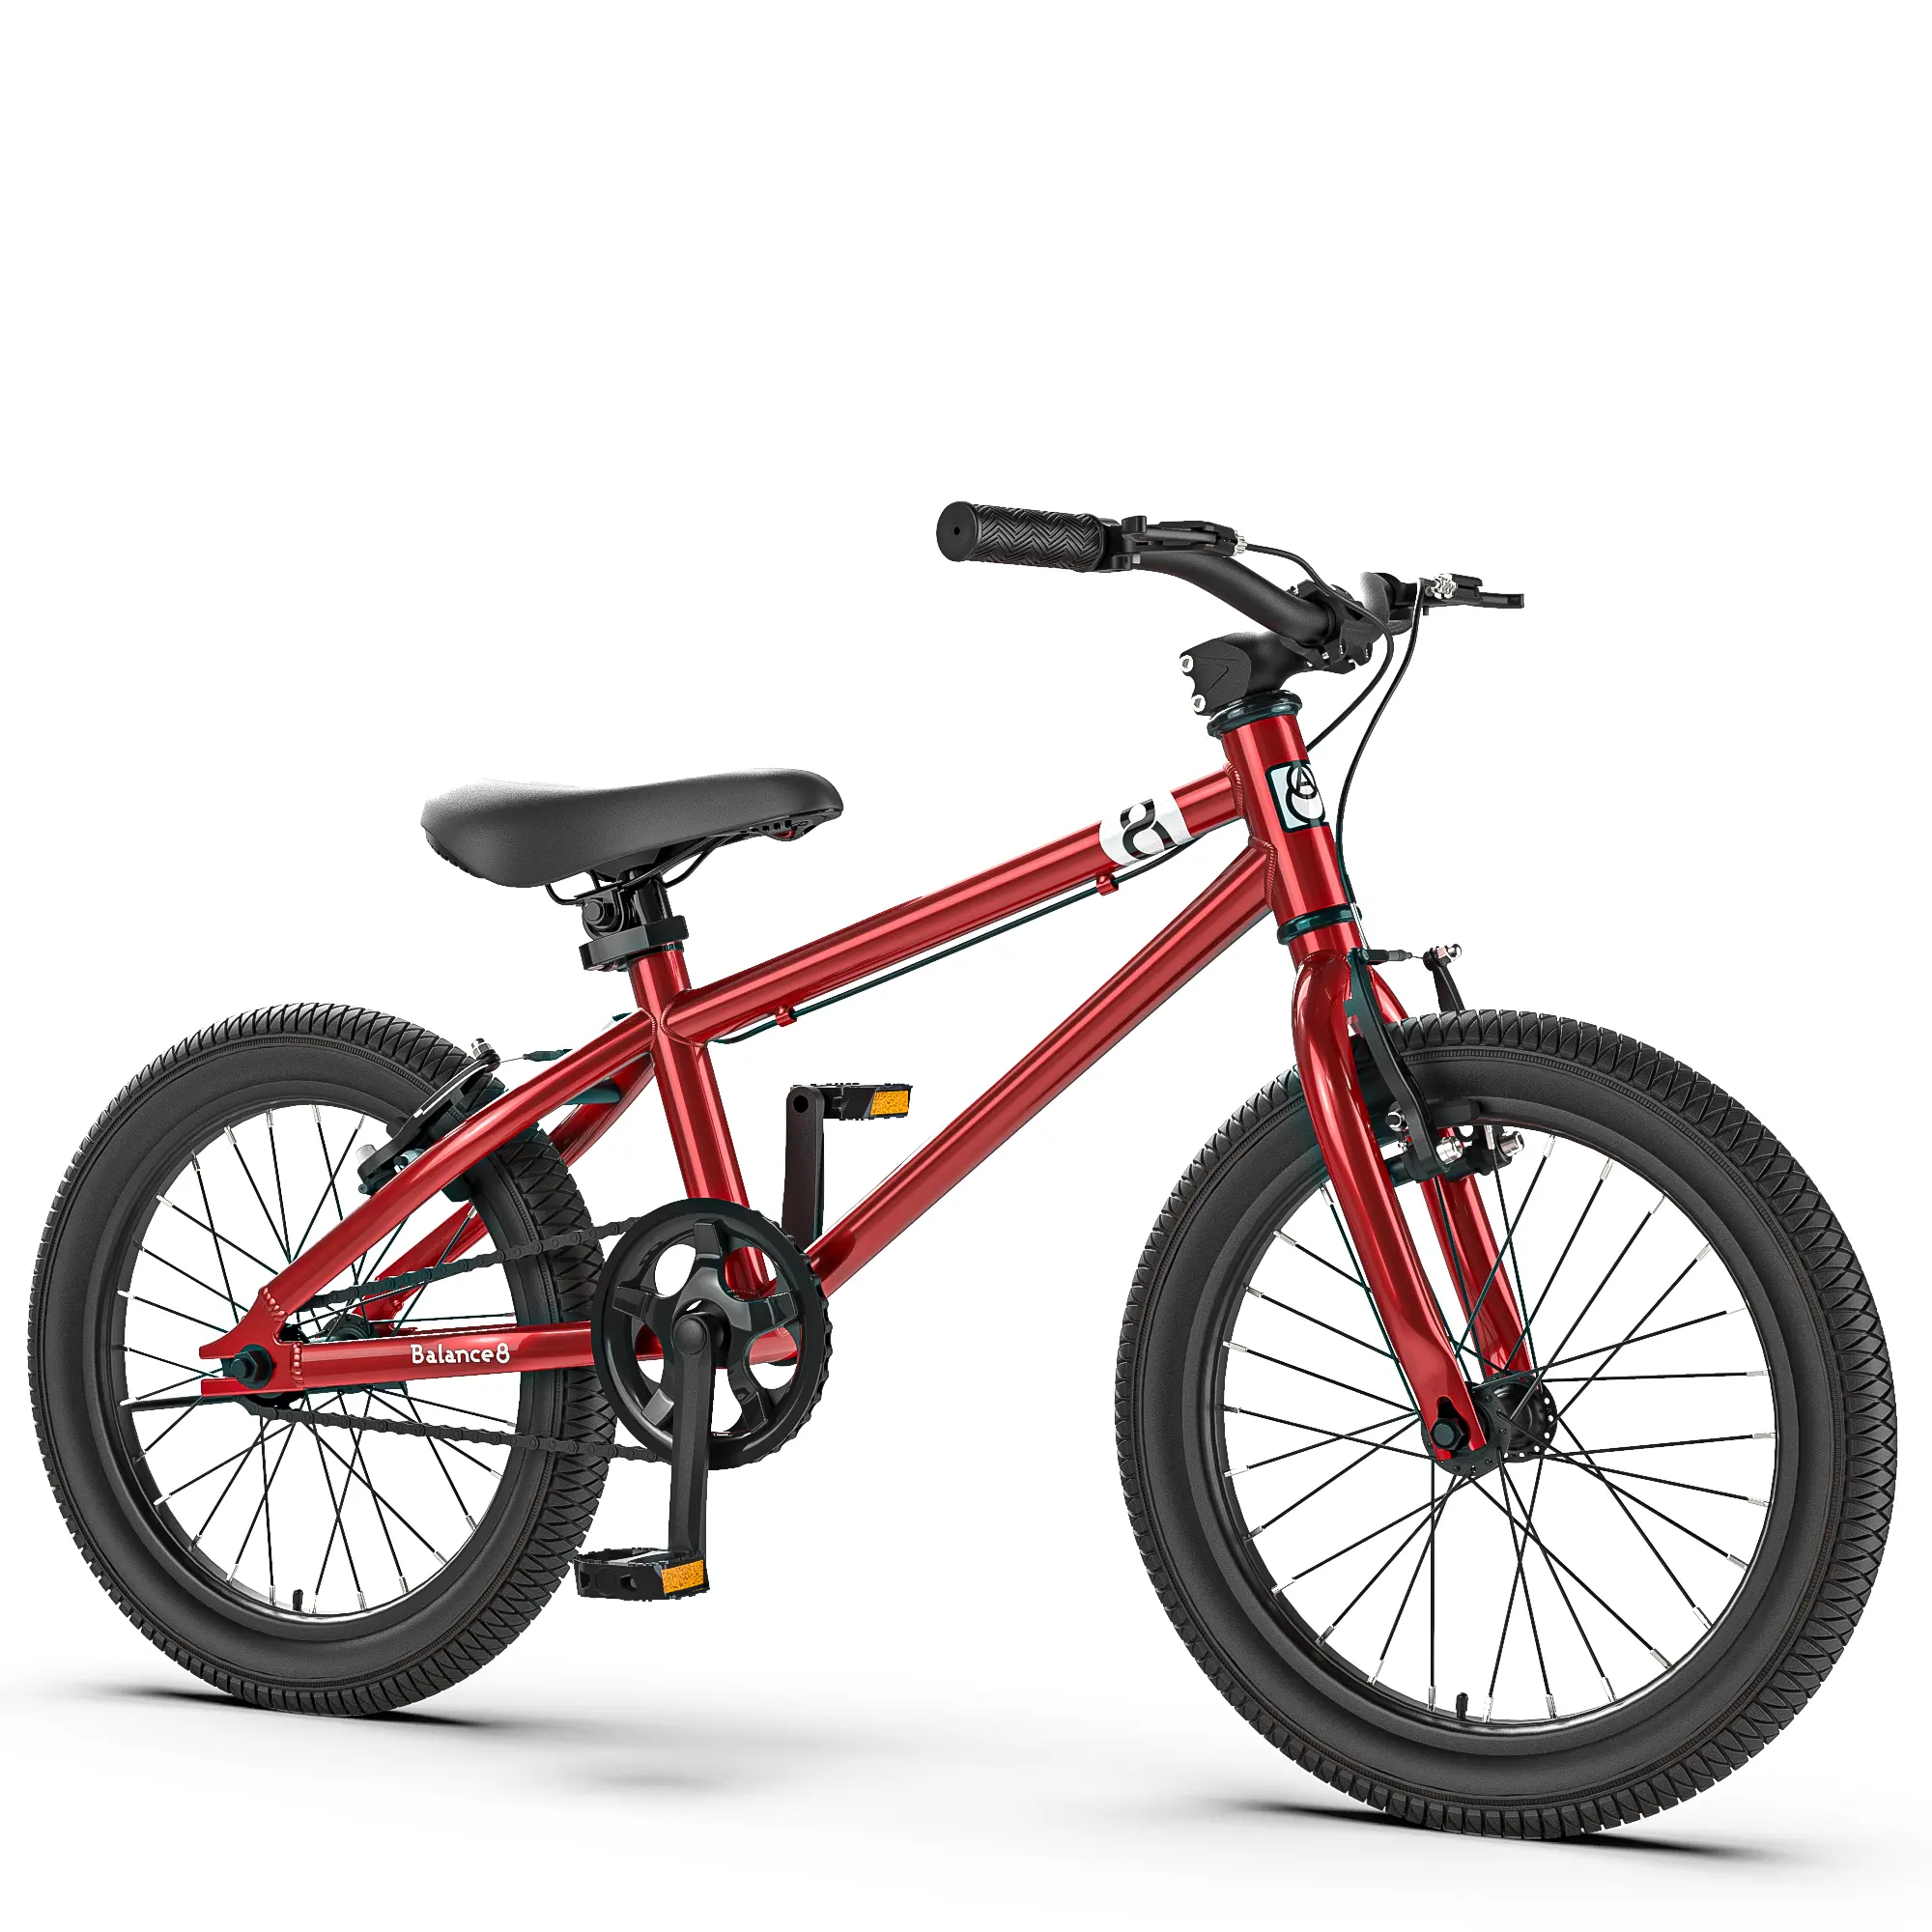 16 18 20 Inch BMX Bike for Boys Street Application Disc Brake Bicycle for Sale